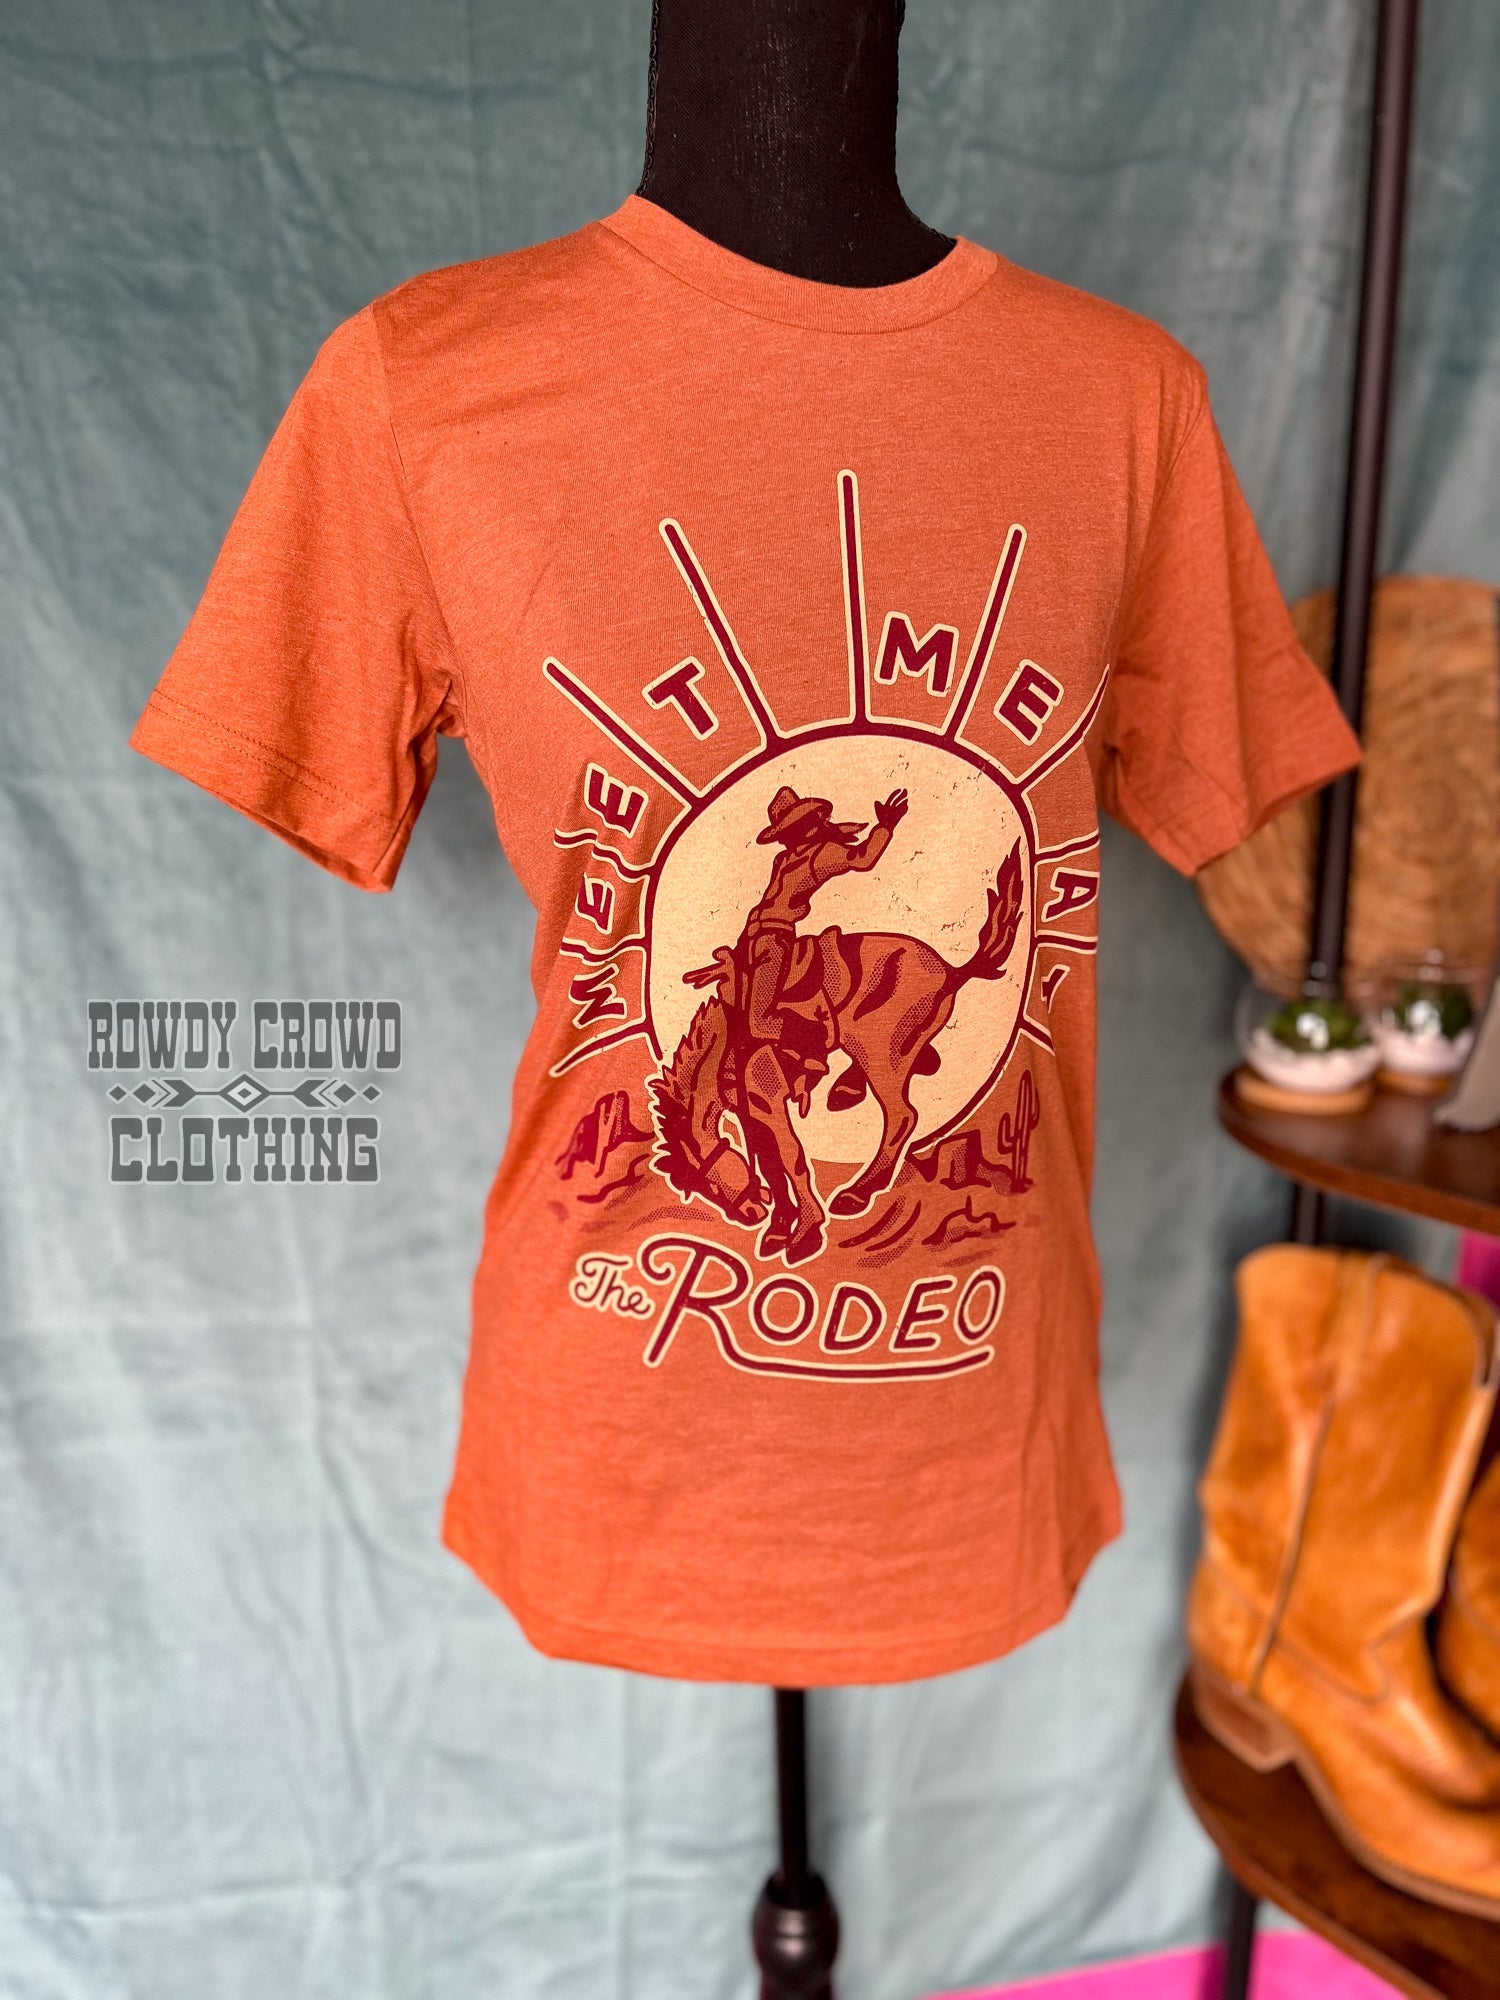 western apparel, western graphic tee, graphic western tees, wholesale clothing, western wholesale, women's western graphic tees, wholesale clothing and jewelry, western boutique clothing, western women's graphic tee